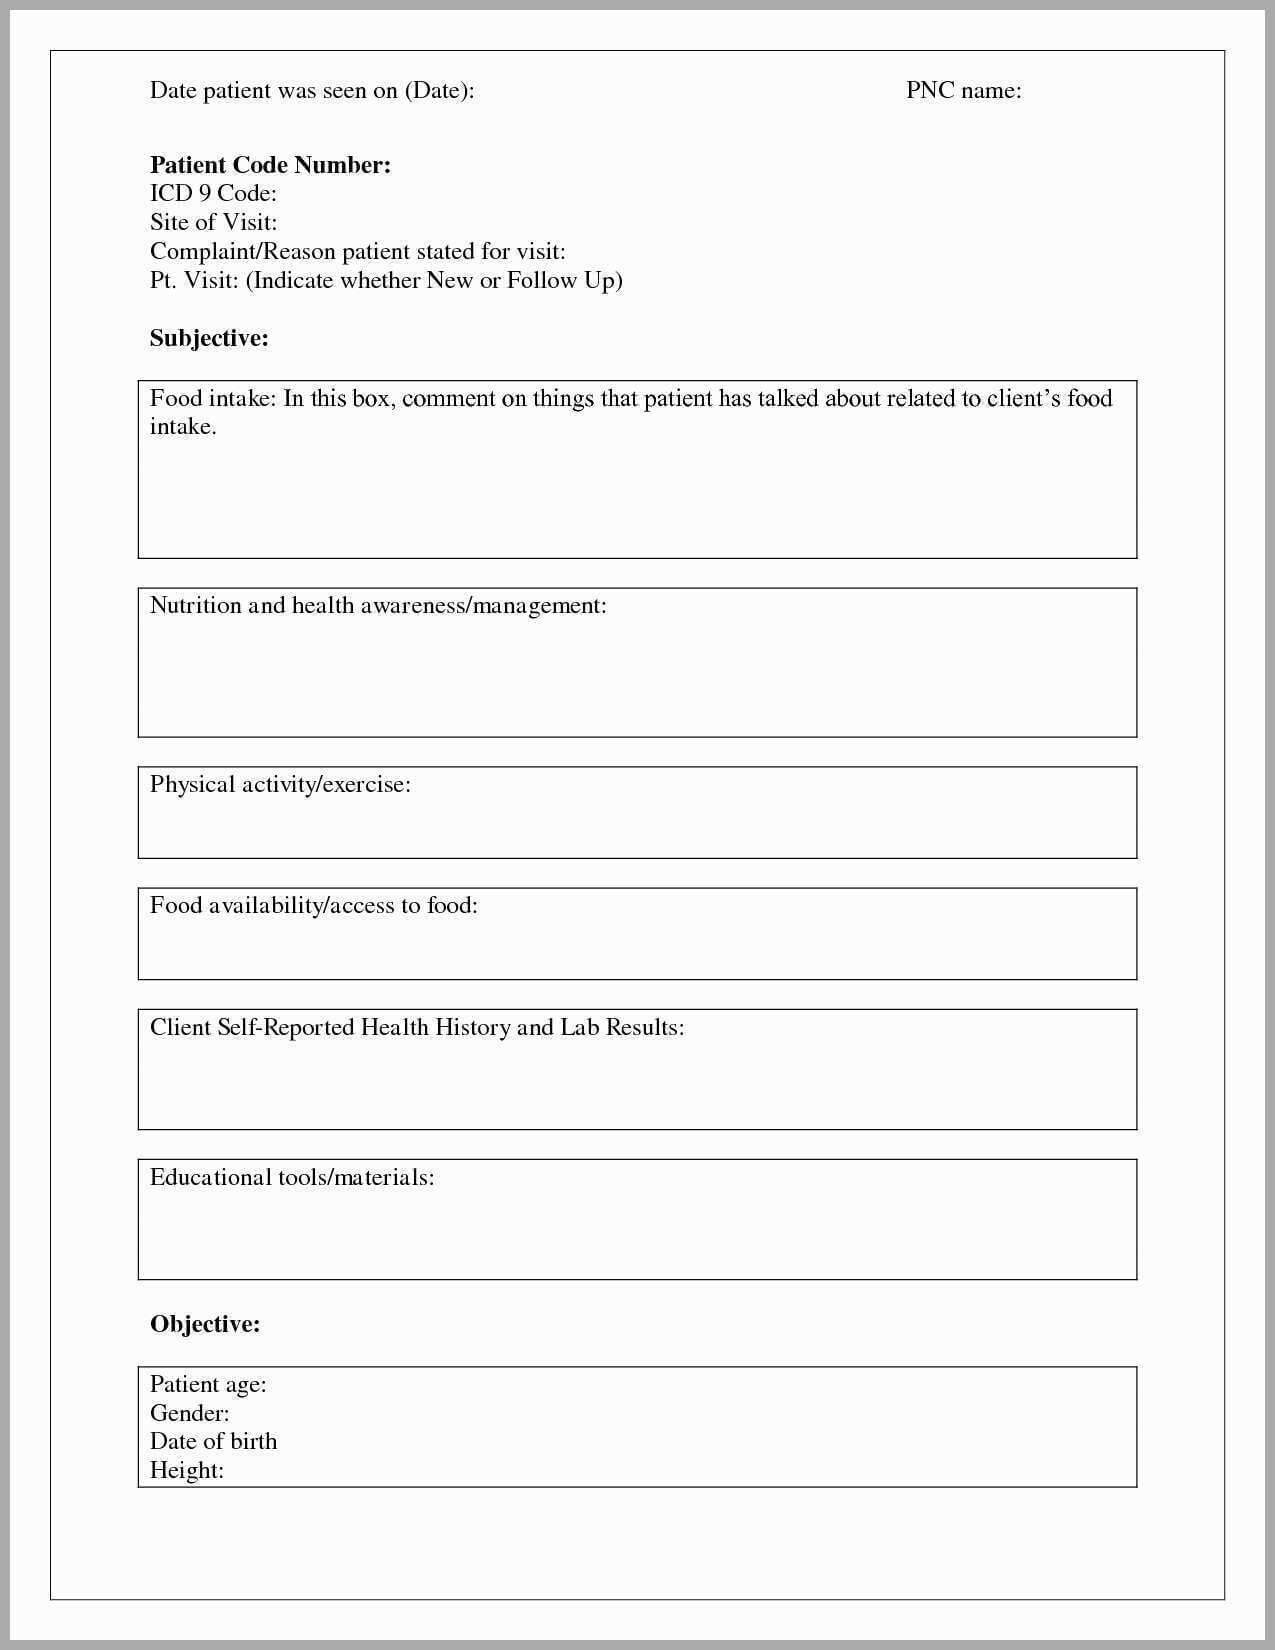 013 Soap Note Template Word Beneficial Blank Pdf Of Intended For Soap Note Template Word